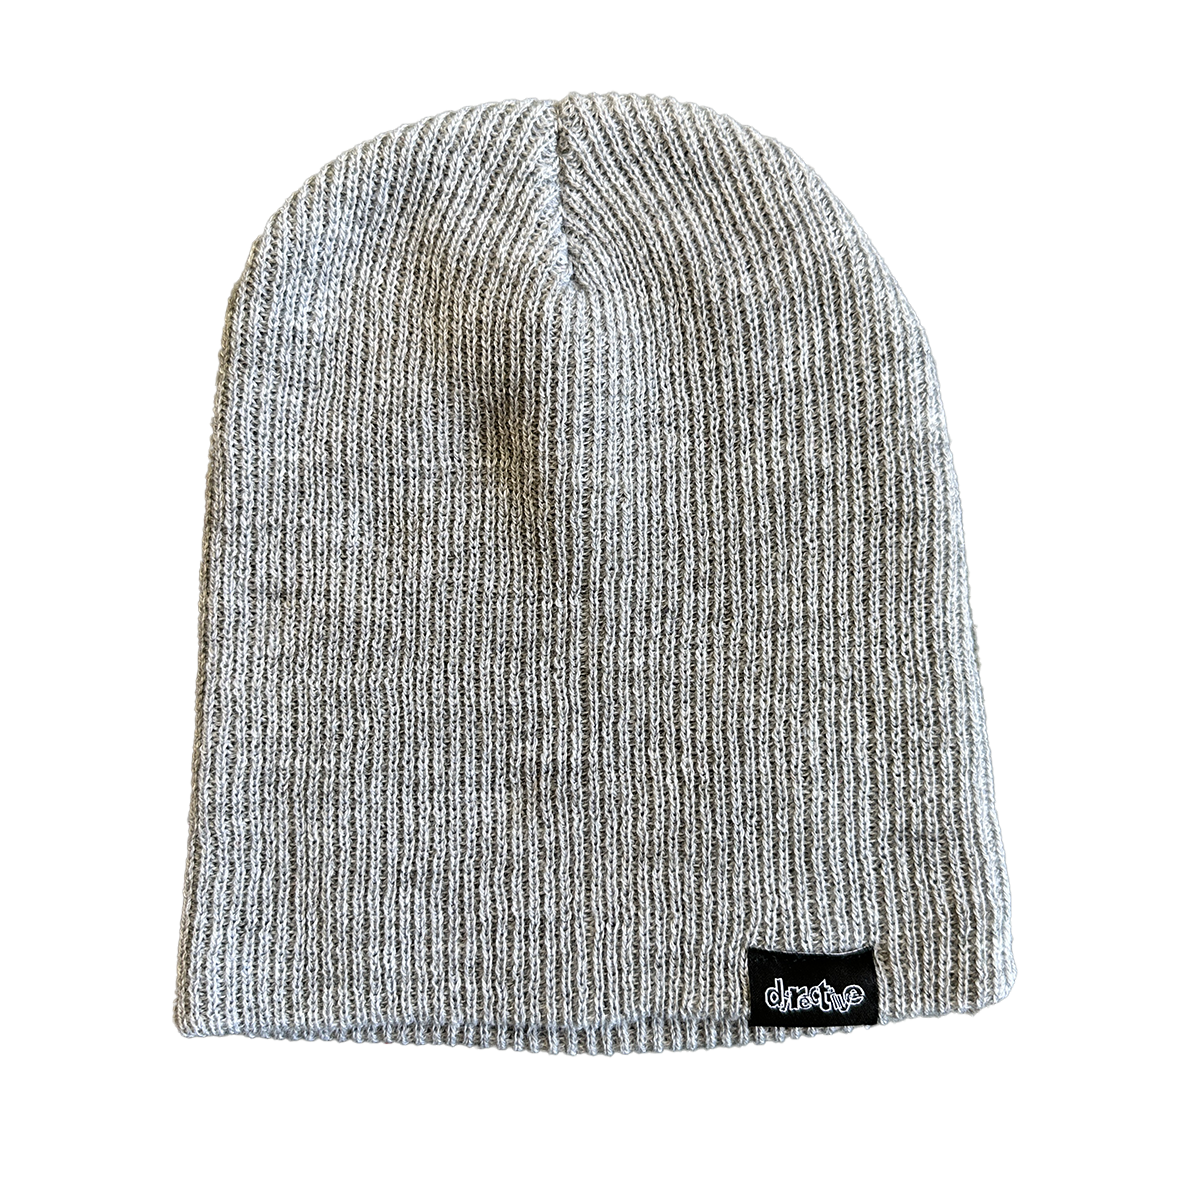 Directive Select Skully Beanie - Grey